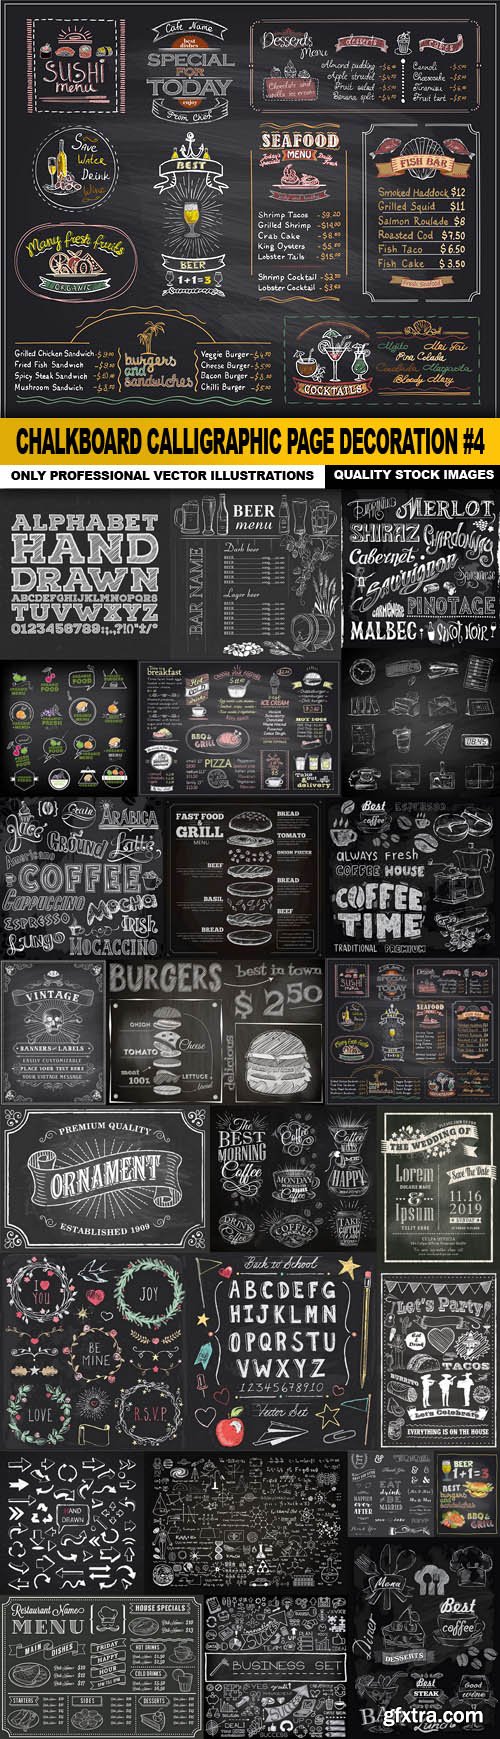 Chalkboard Calligraphic Page Decoration #4 - 25 Vector